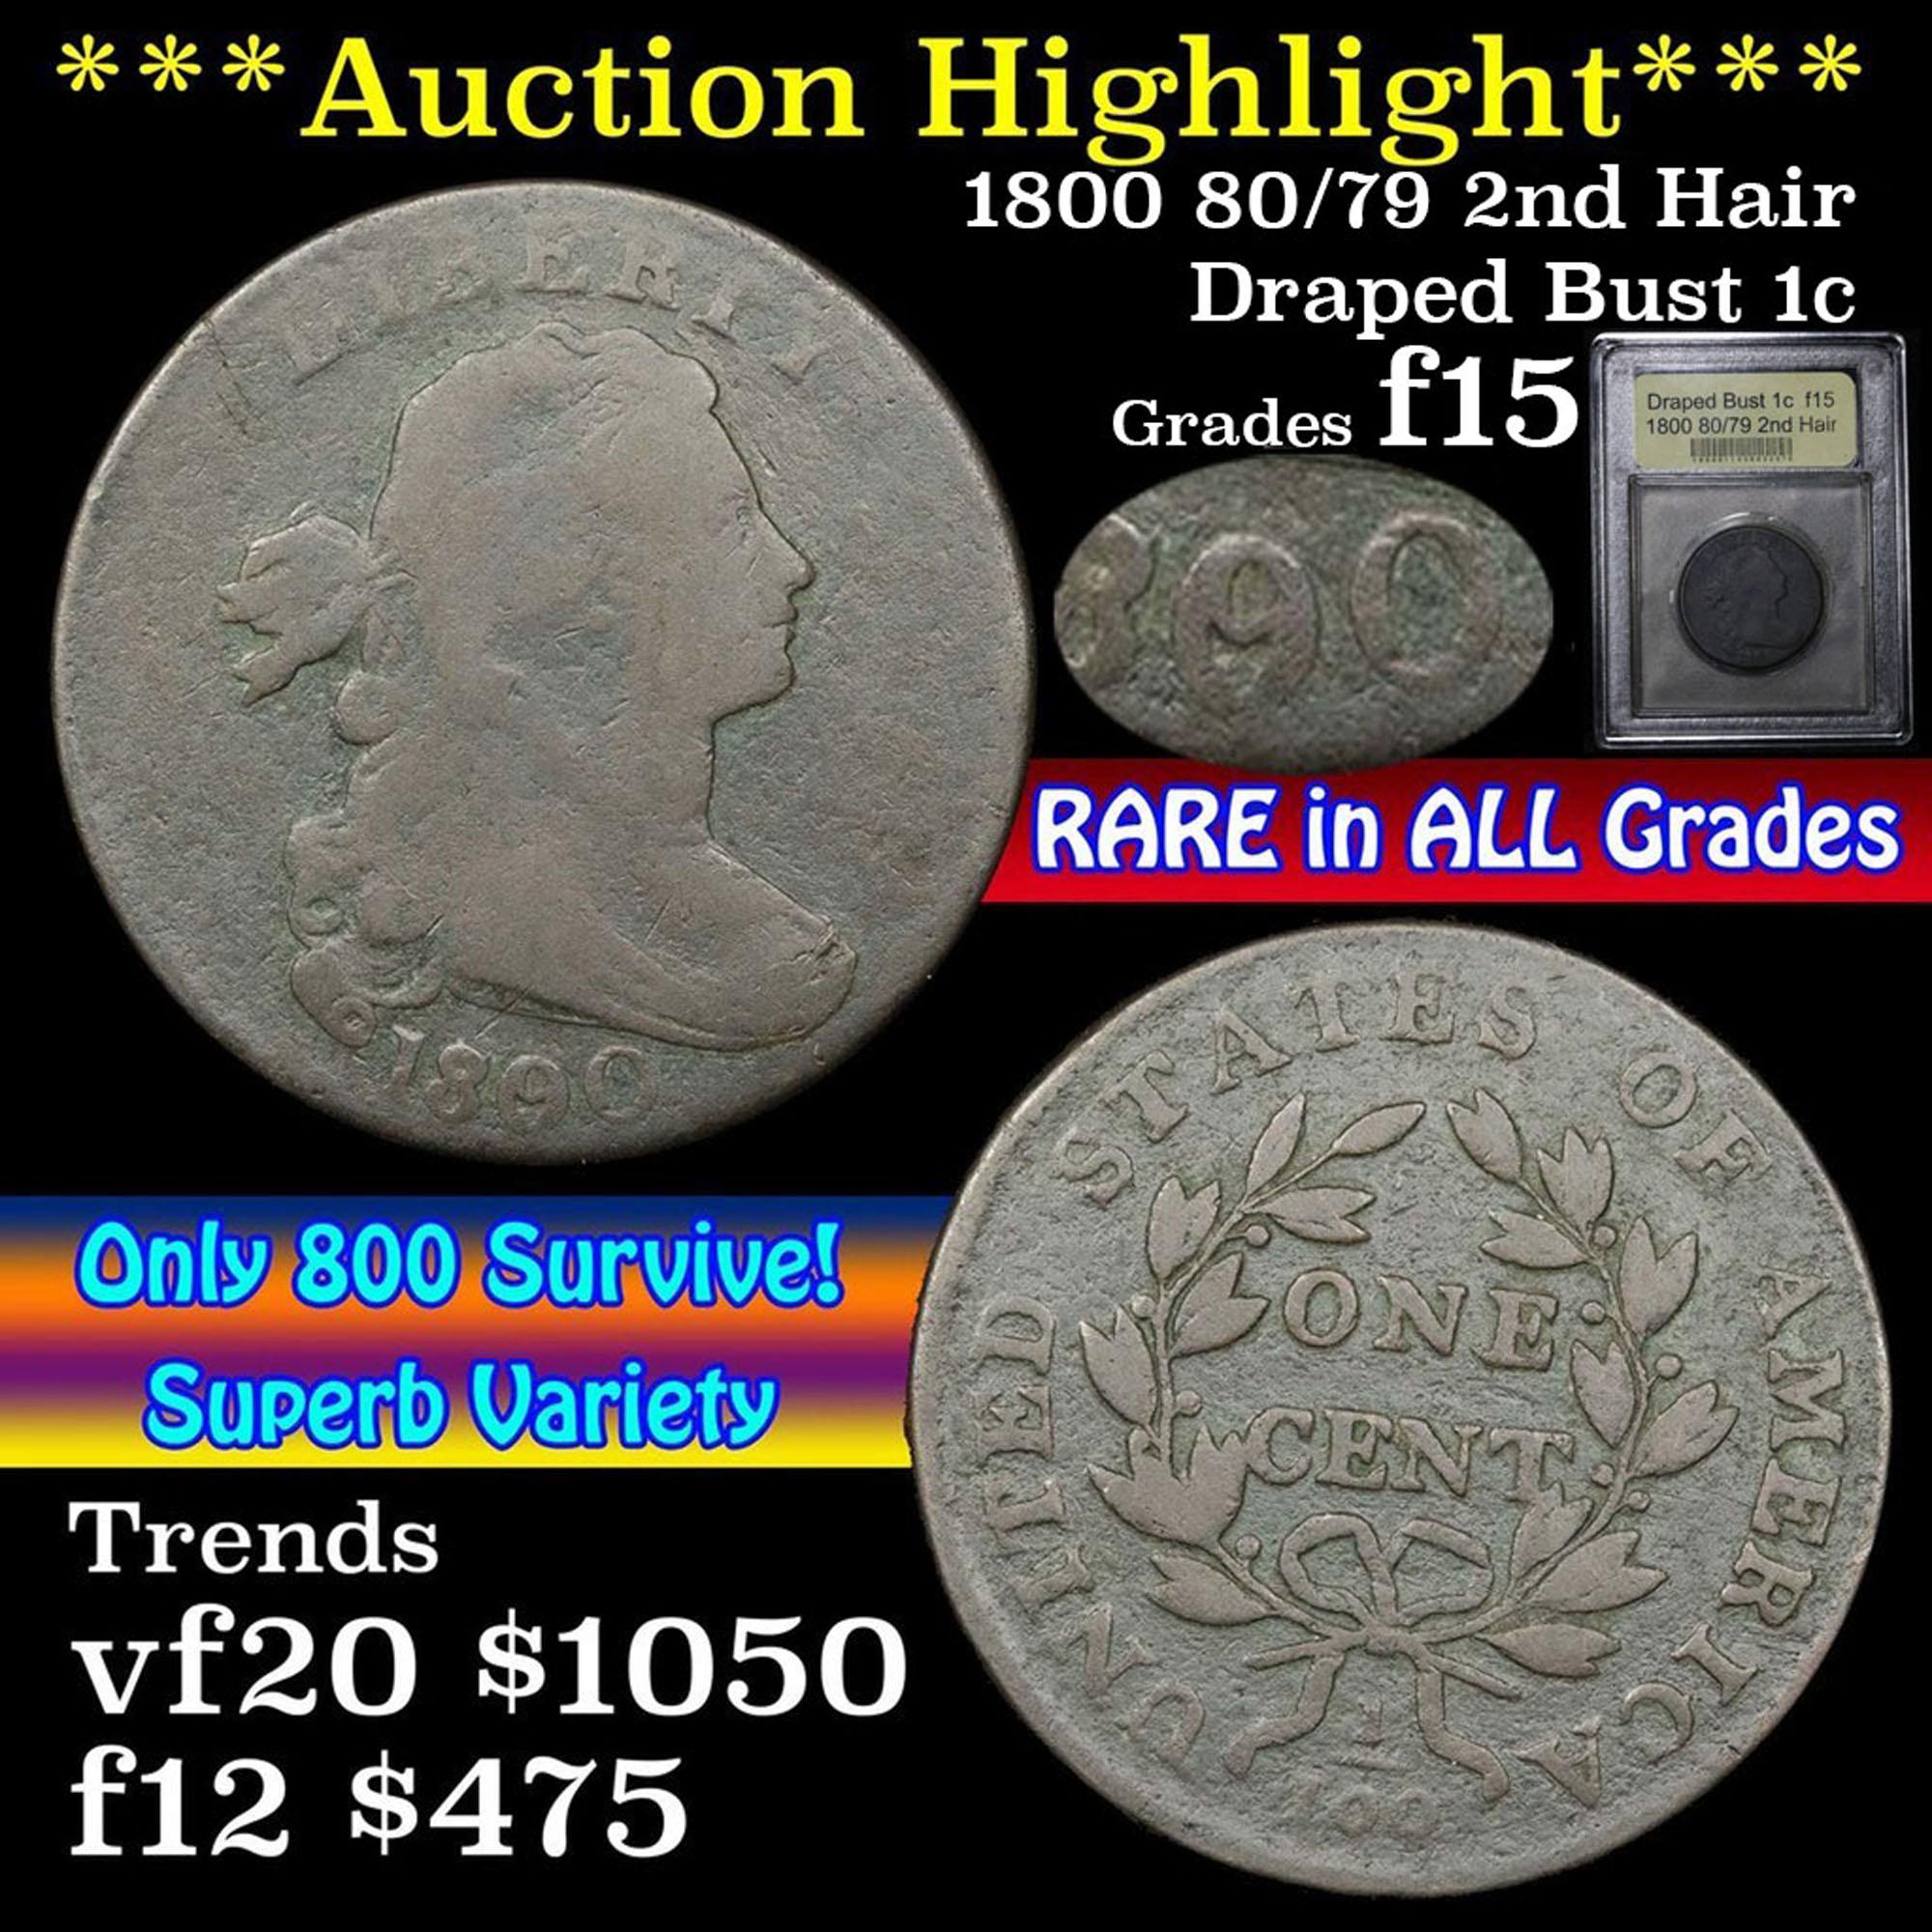 ***Auction Highlight*** 1800 80/79 2nd Hair Draped Bust Large Cent 1c Graded f+ by USCG (fc)